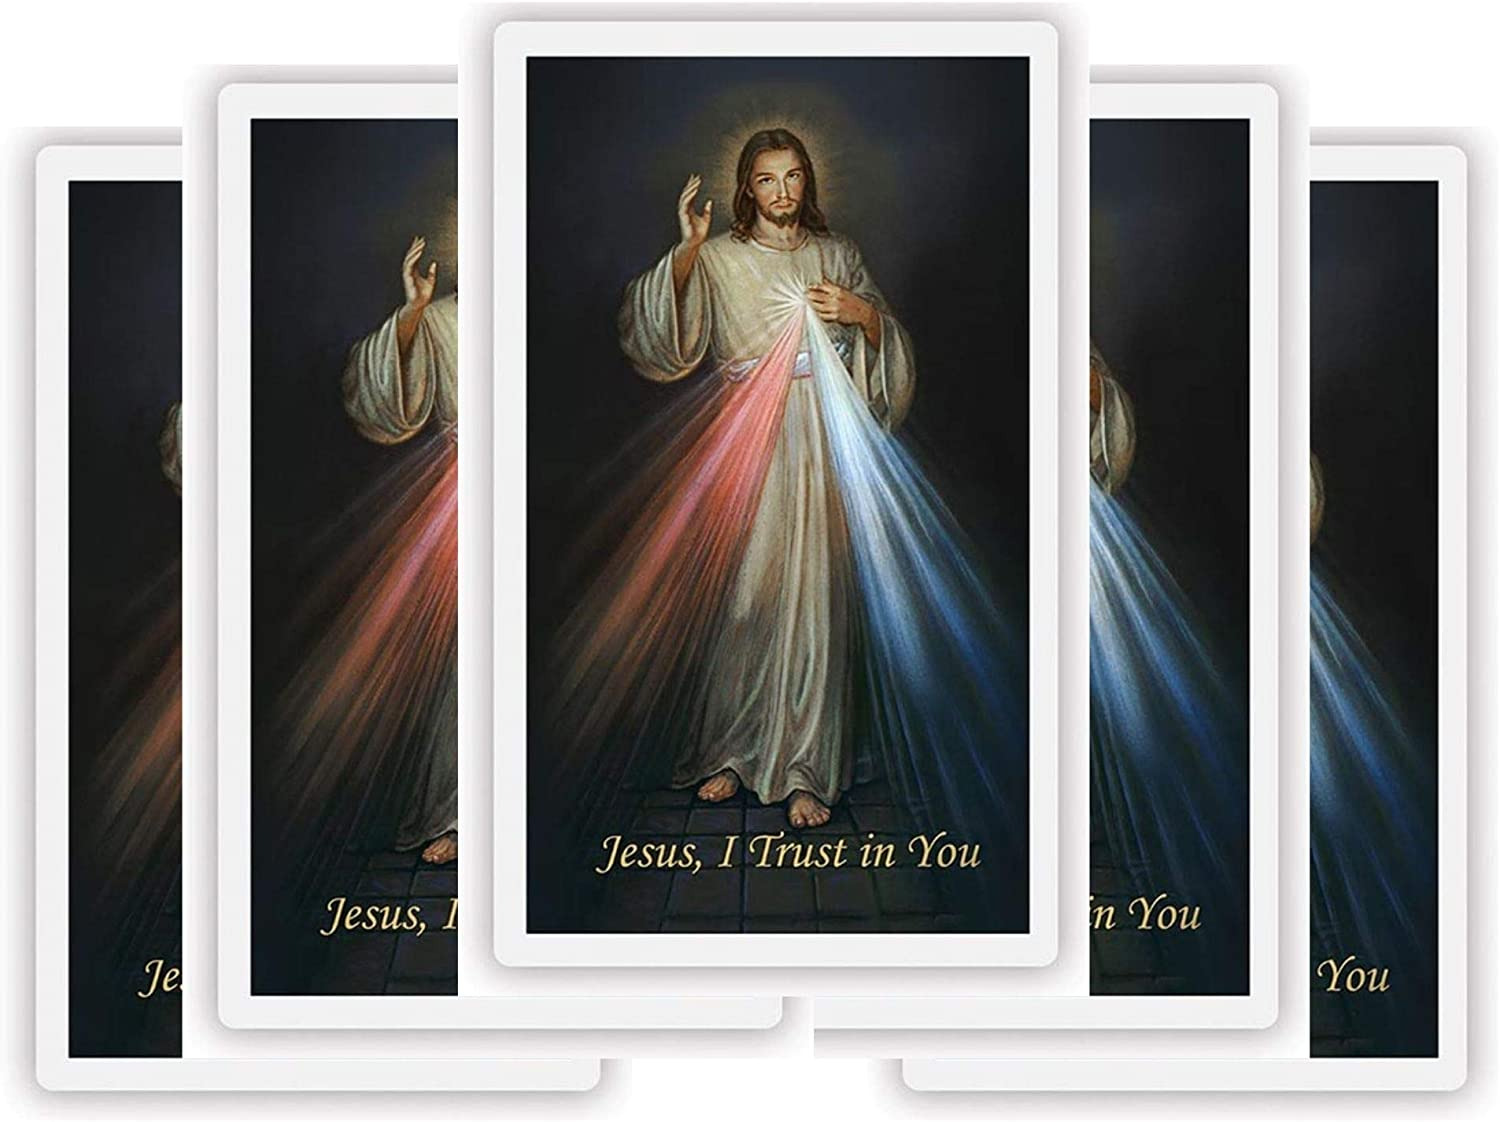 Jesus I Trust in You Divine Mercy Cardstock Laminated Wallet Sized Print with Ch